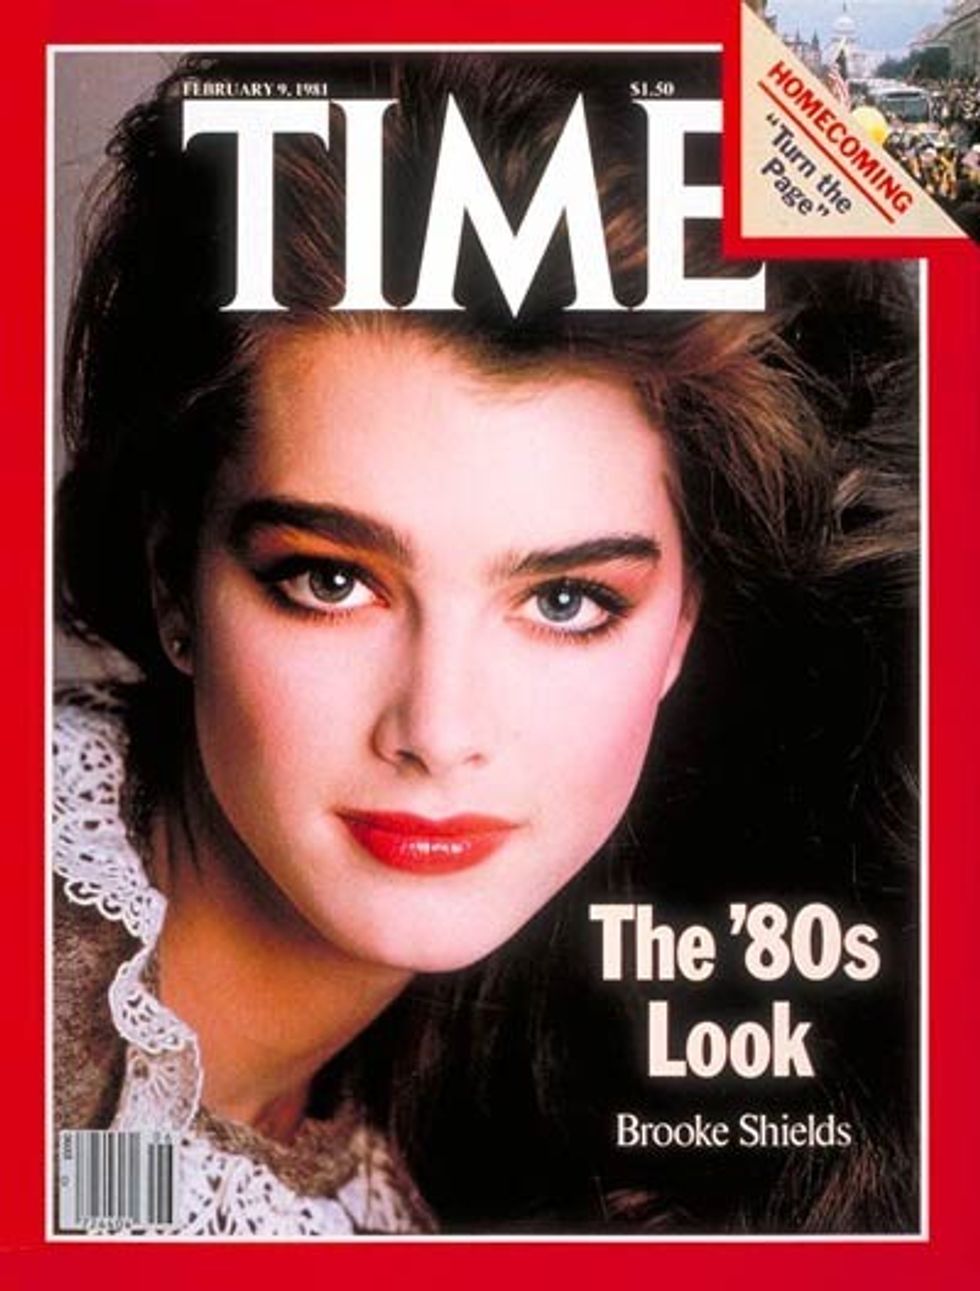 Brooke Shields on the cover of TIME Magazine